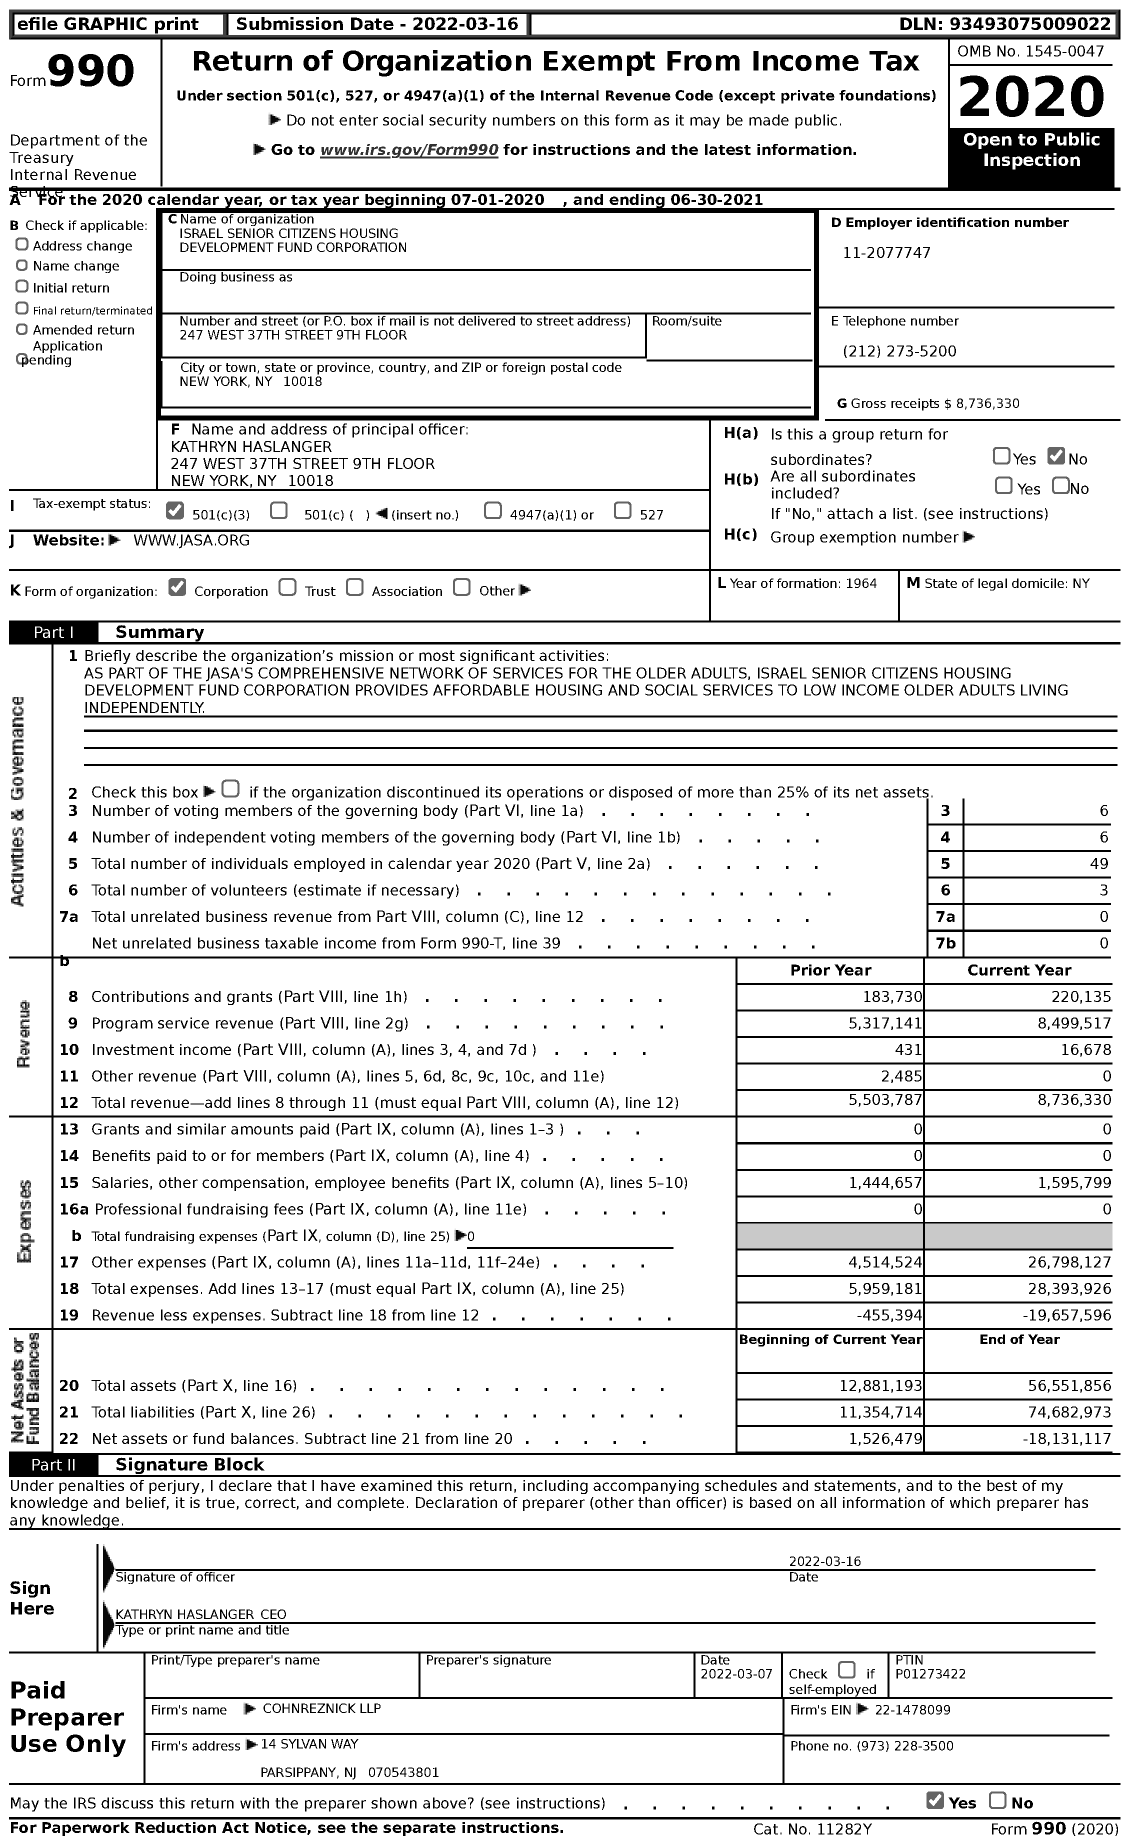 Image of first page of 2020 Form 990 for Israel Senior Citizens Housing Development Fund Corporation